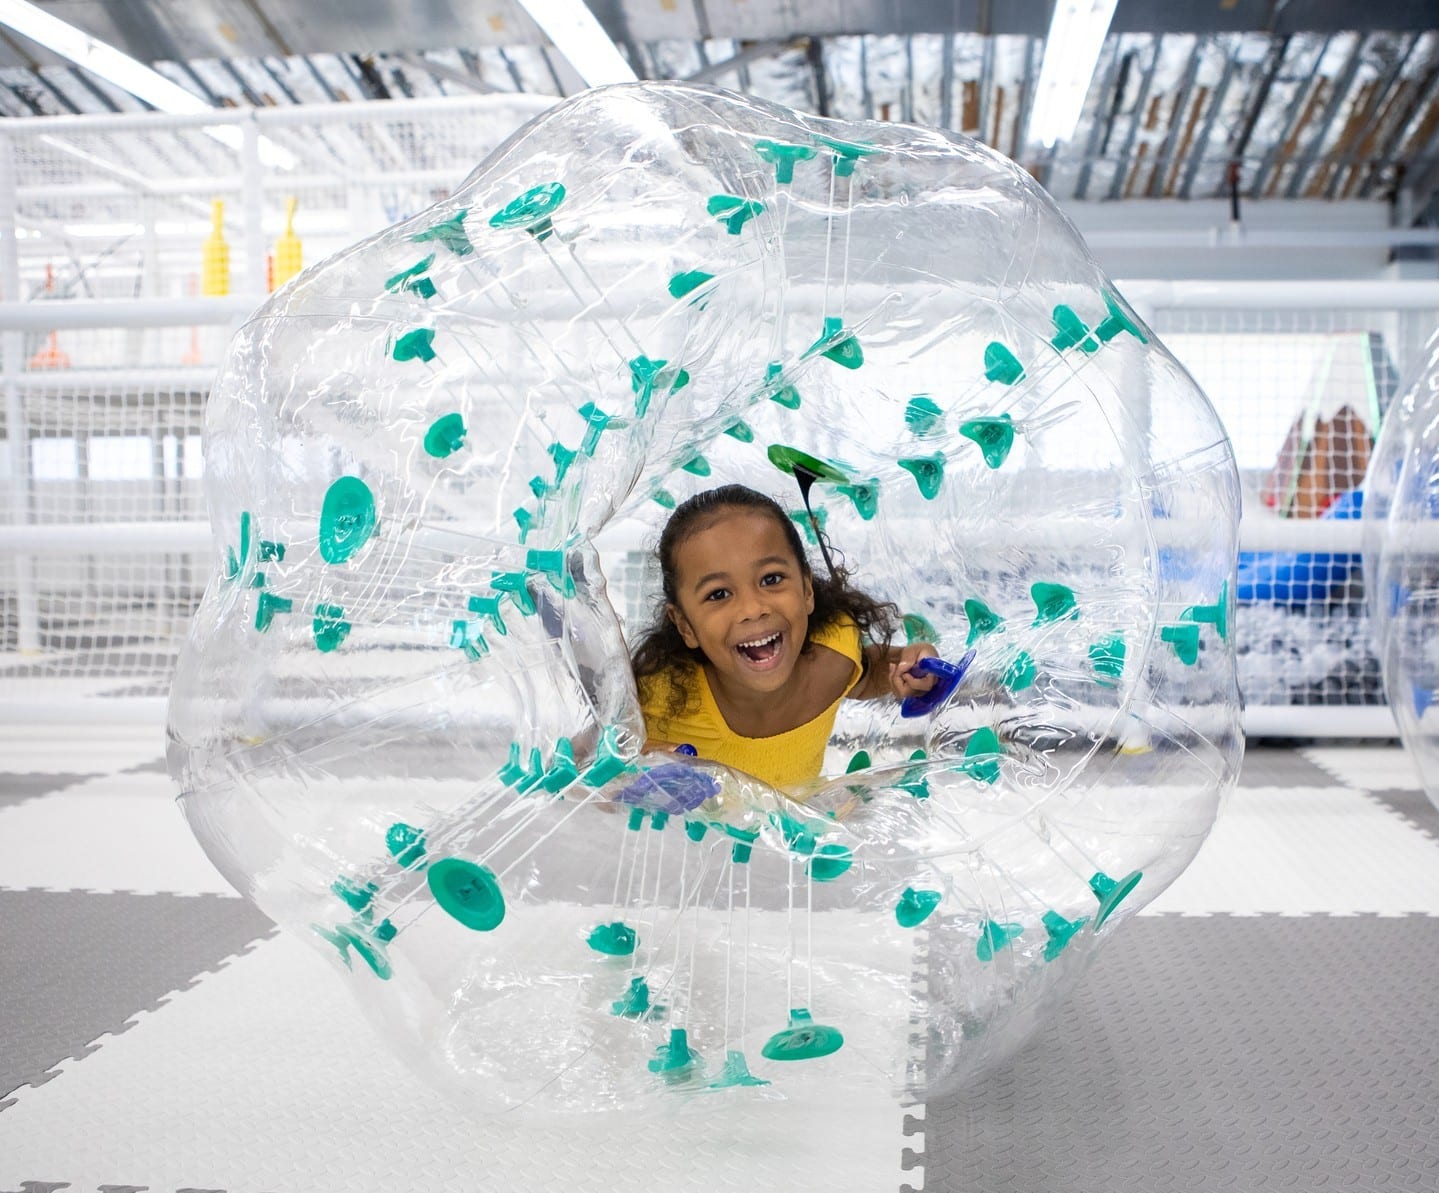 Experience new and exciting ways to play at Kids City Adventure! With the recent addition of brand-new toys and playground features, keiki from 7 months to 13 years old now have even more to discover at @kidscityhawaii in Ward Centre. #wardvillage #honolulu #oahu